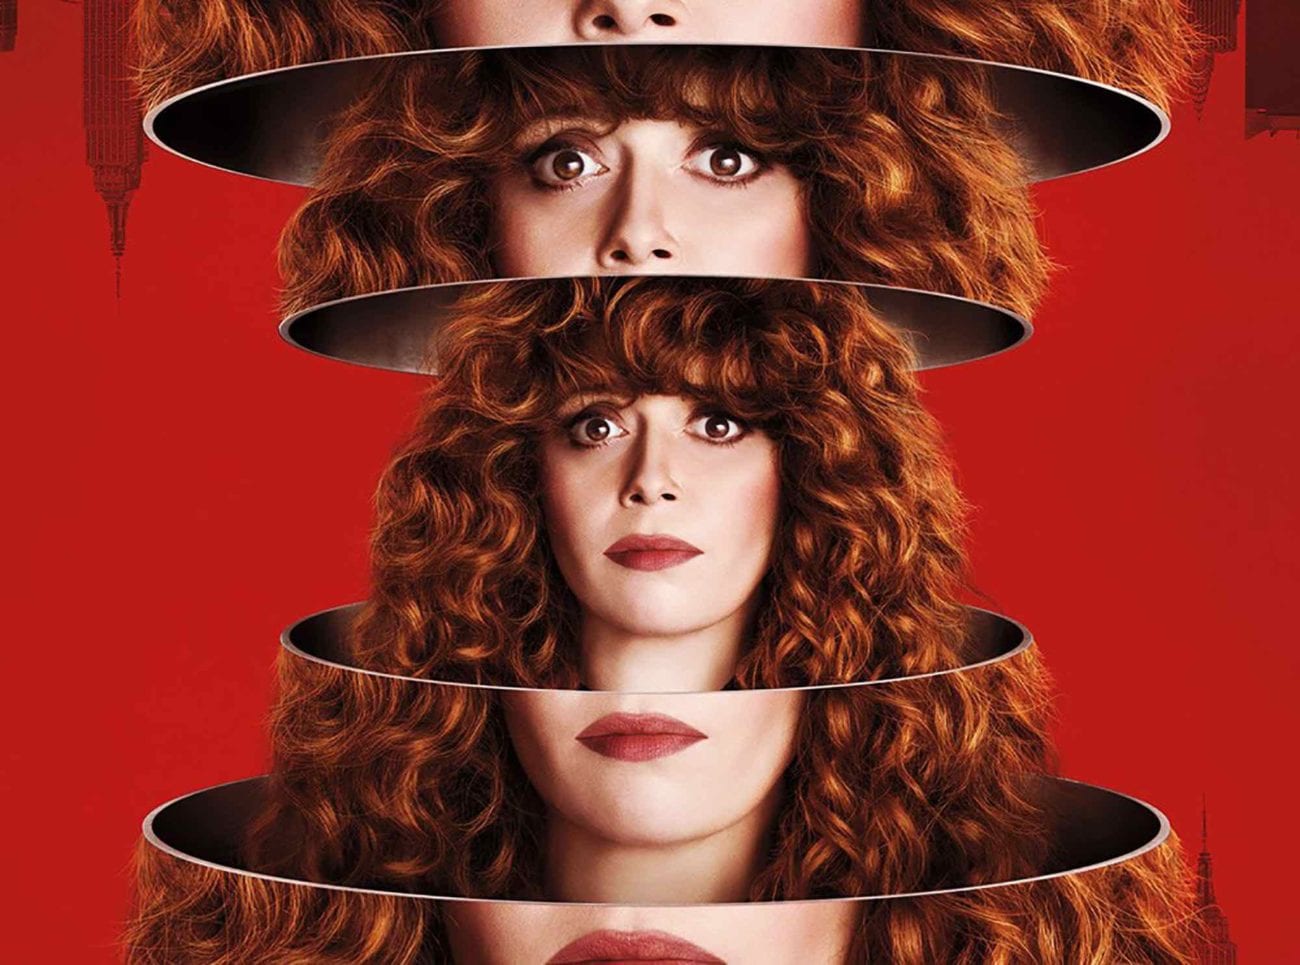 We were stoked to see Netflix’s 'Russian Doll' is getting a second season. What lies in Nadia’s future? We have some ideas of what we want out of season 2.